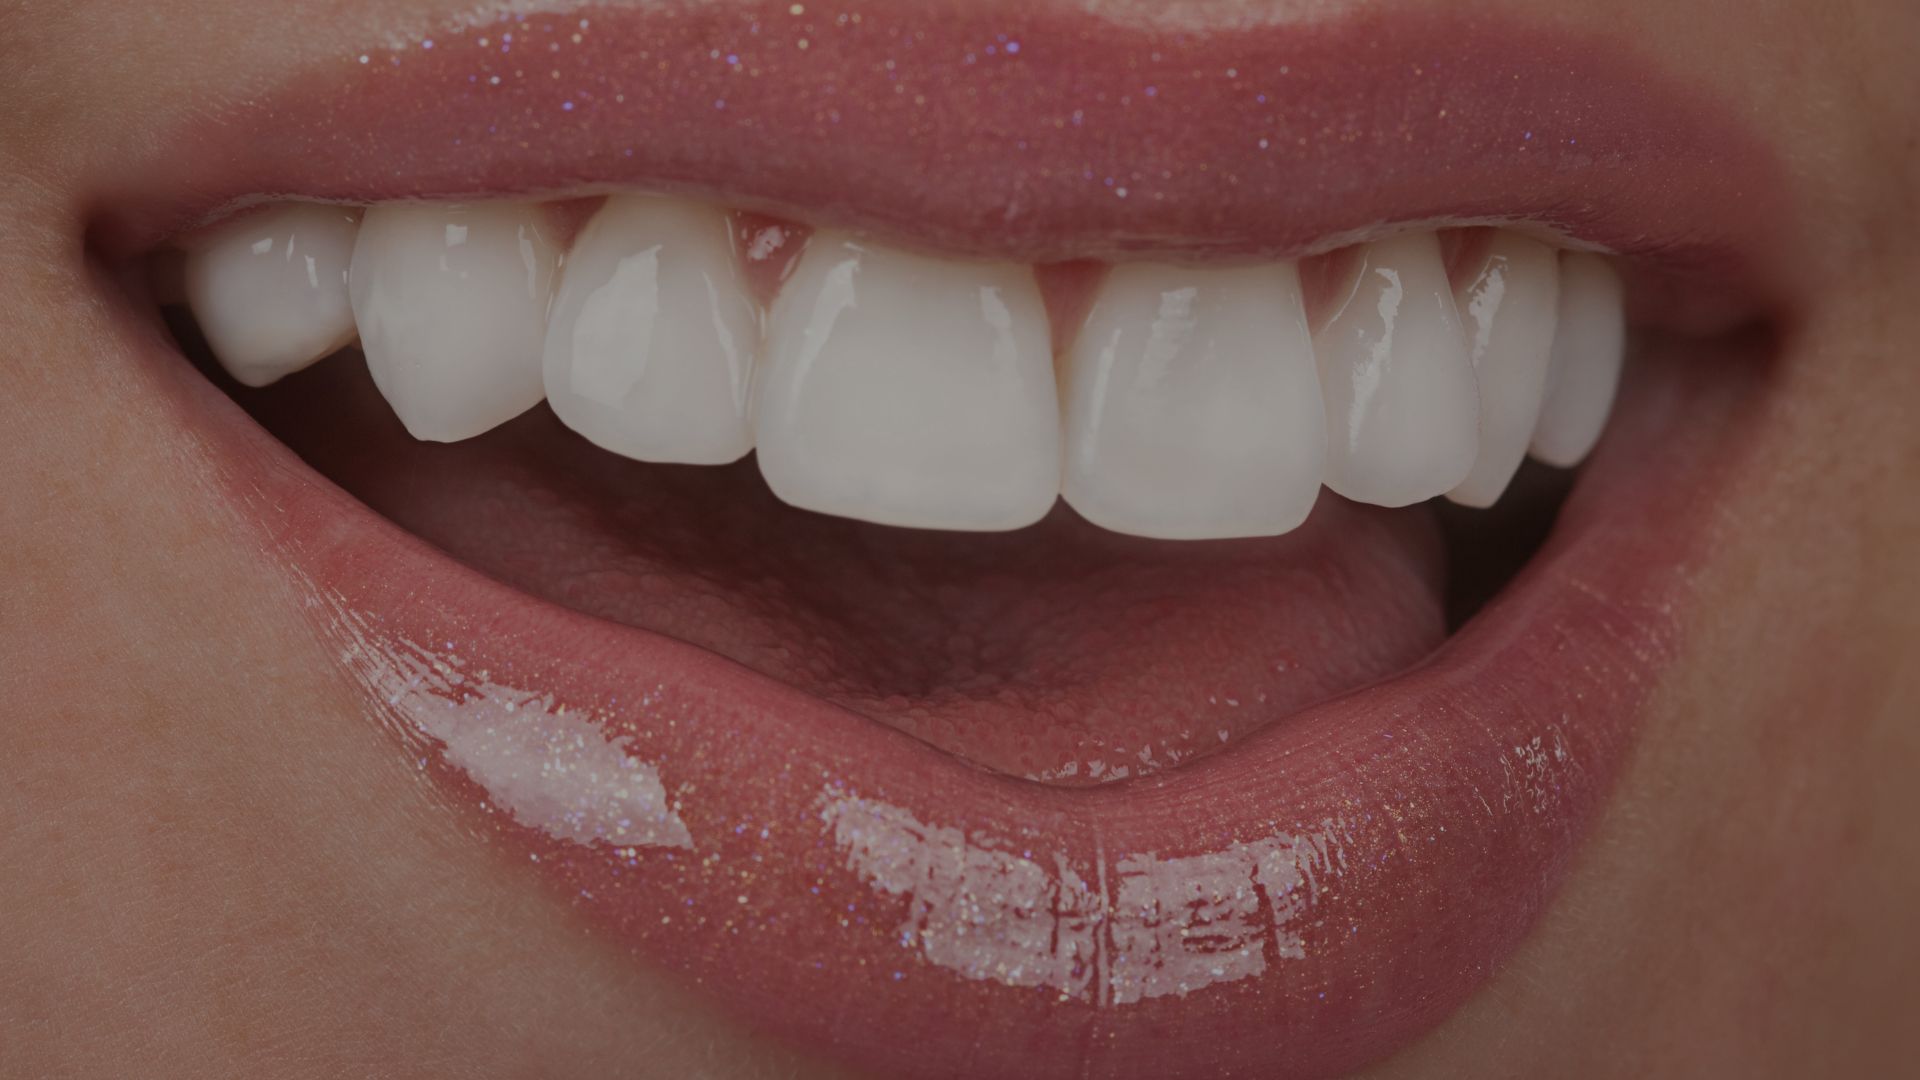 Smiling mouth with white teeth